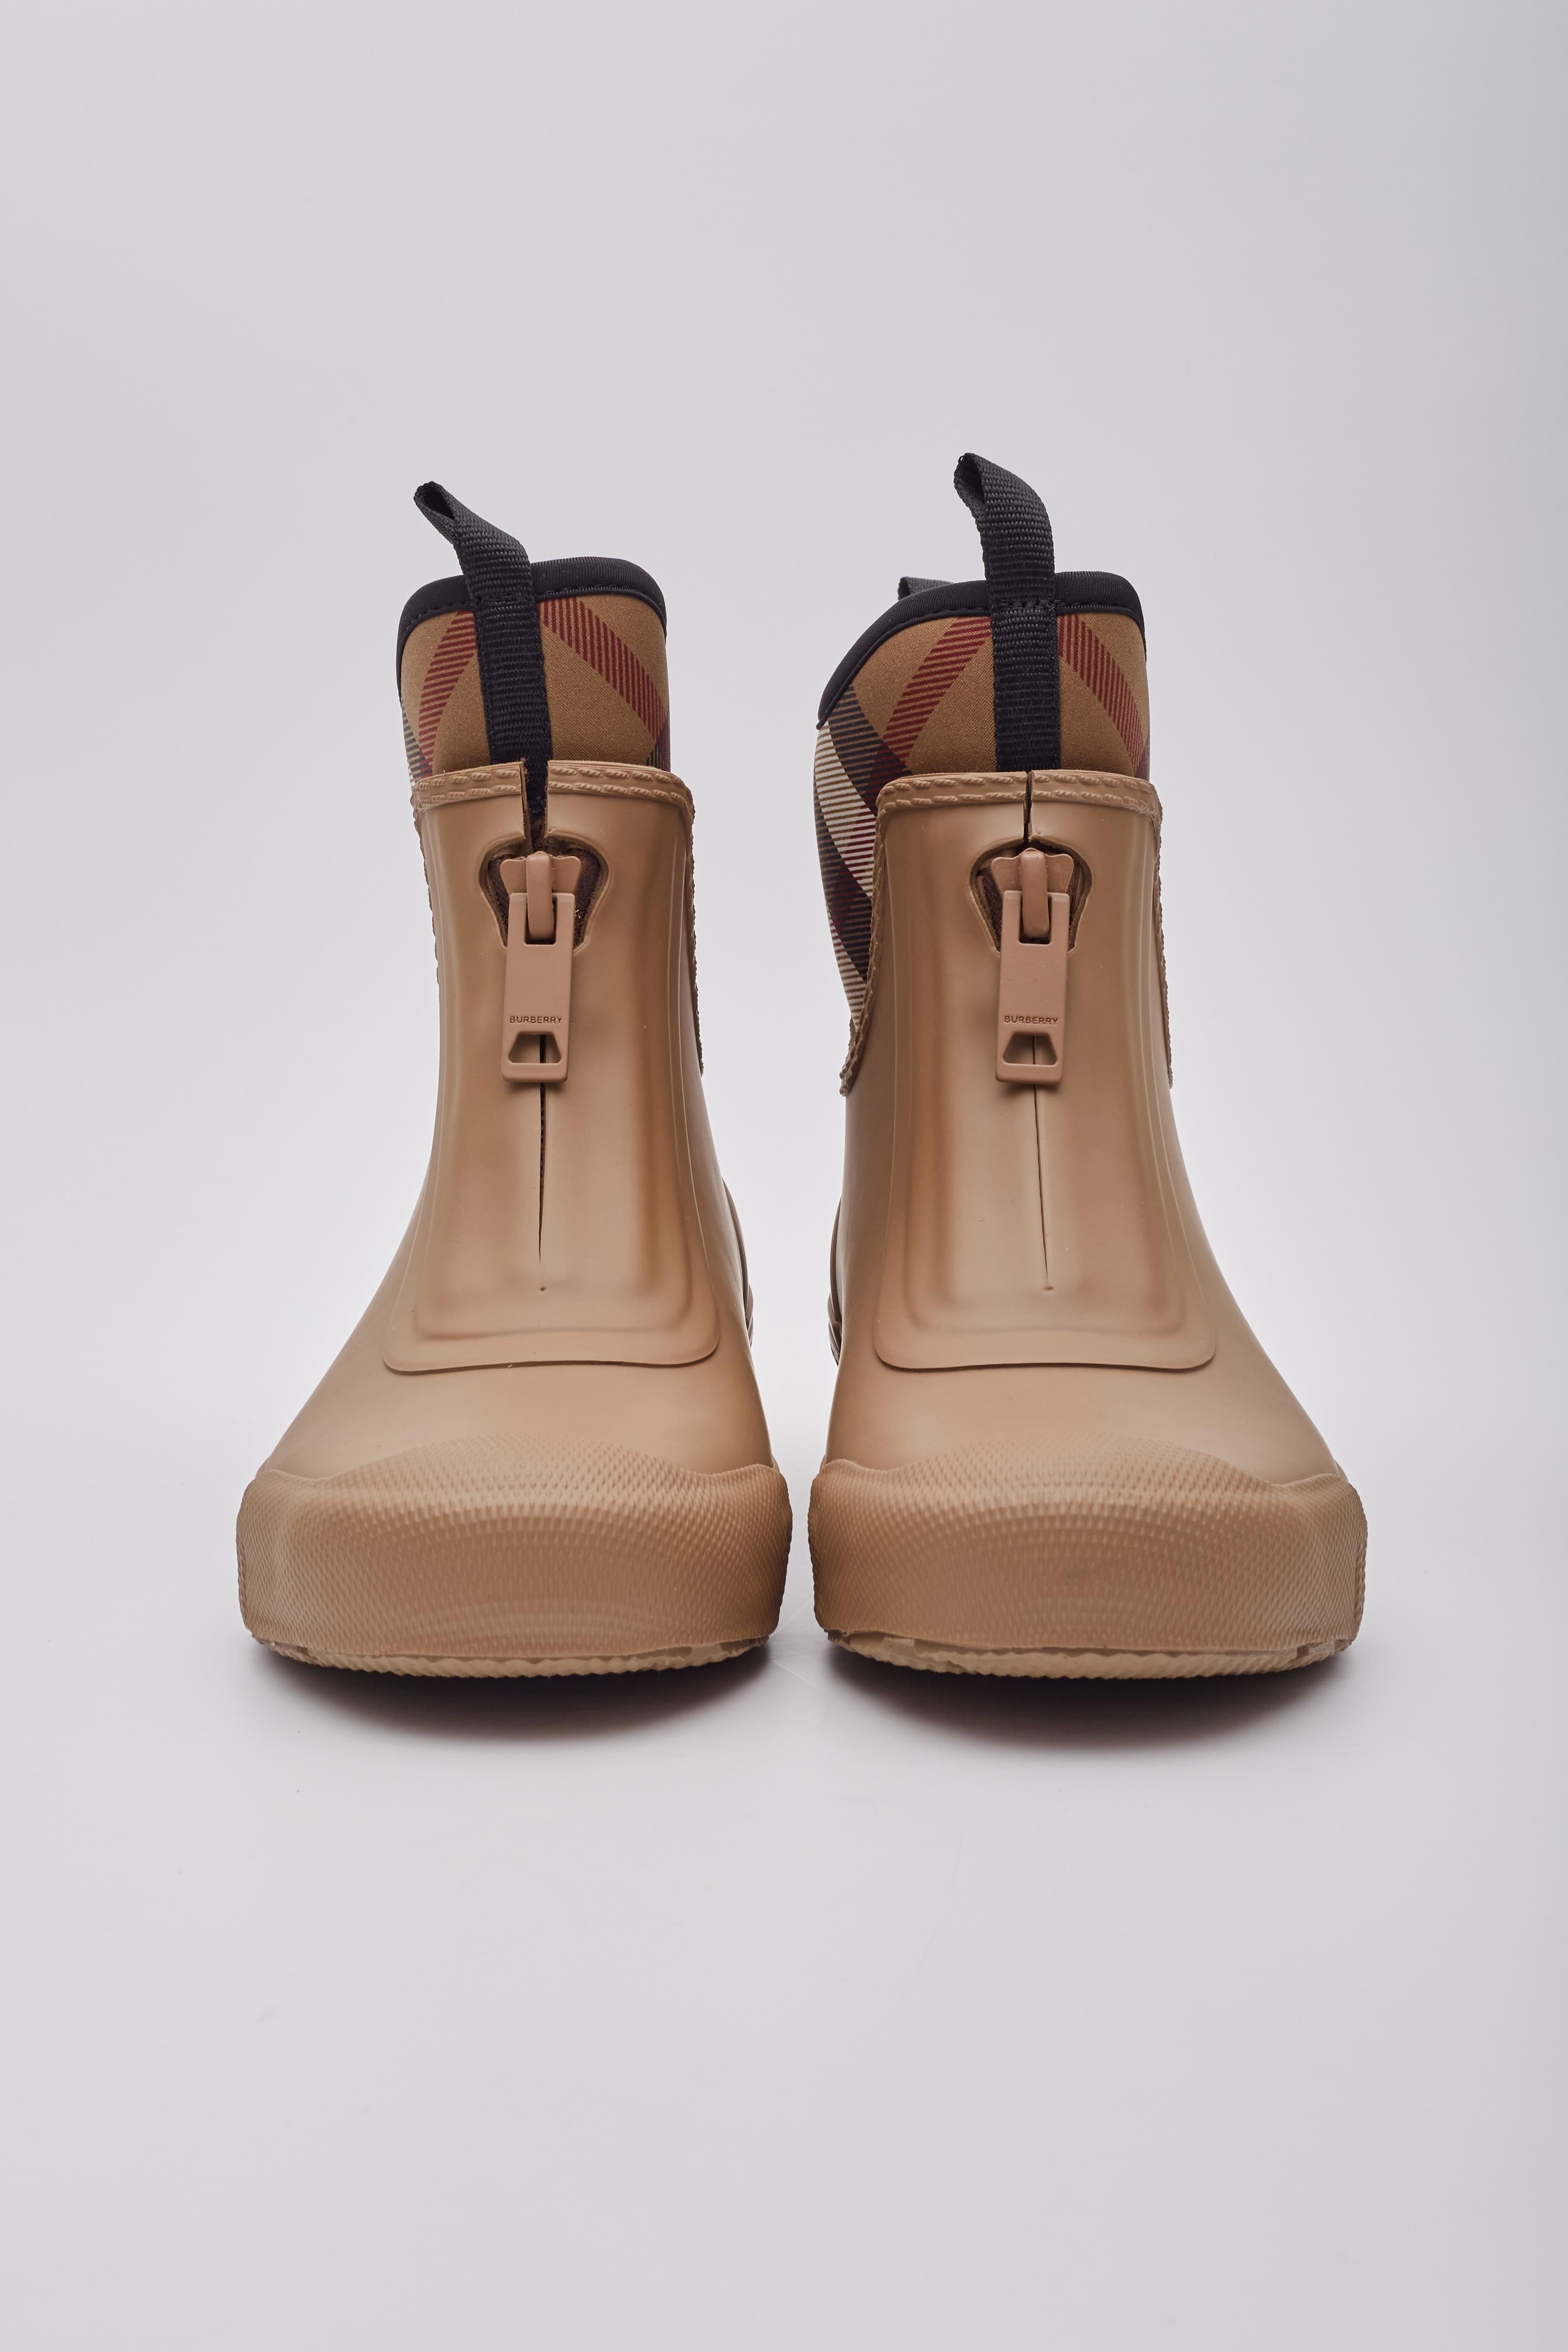 Introducing the Burberry Classic Style Rain Boots. Crafted from durable birch-brown rubber, these boots feature convenient zip fastening and a removable house check neoprene sock. This innovative design ensures you stay dry in changing conditions.